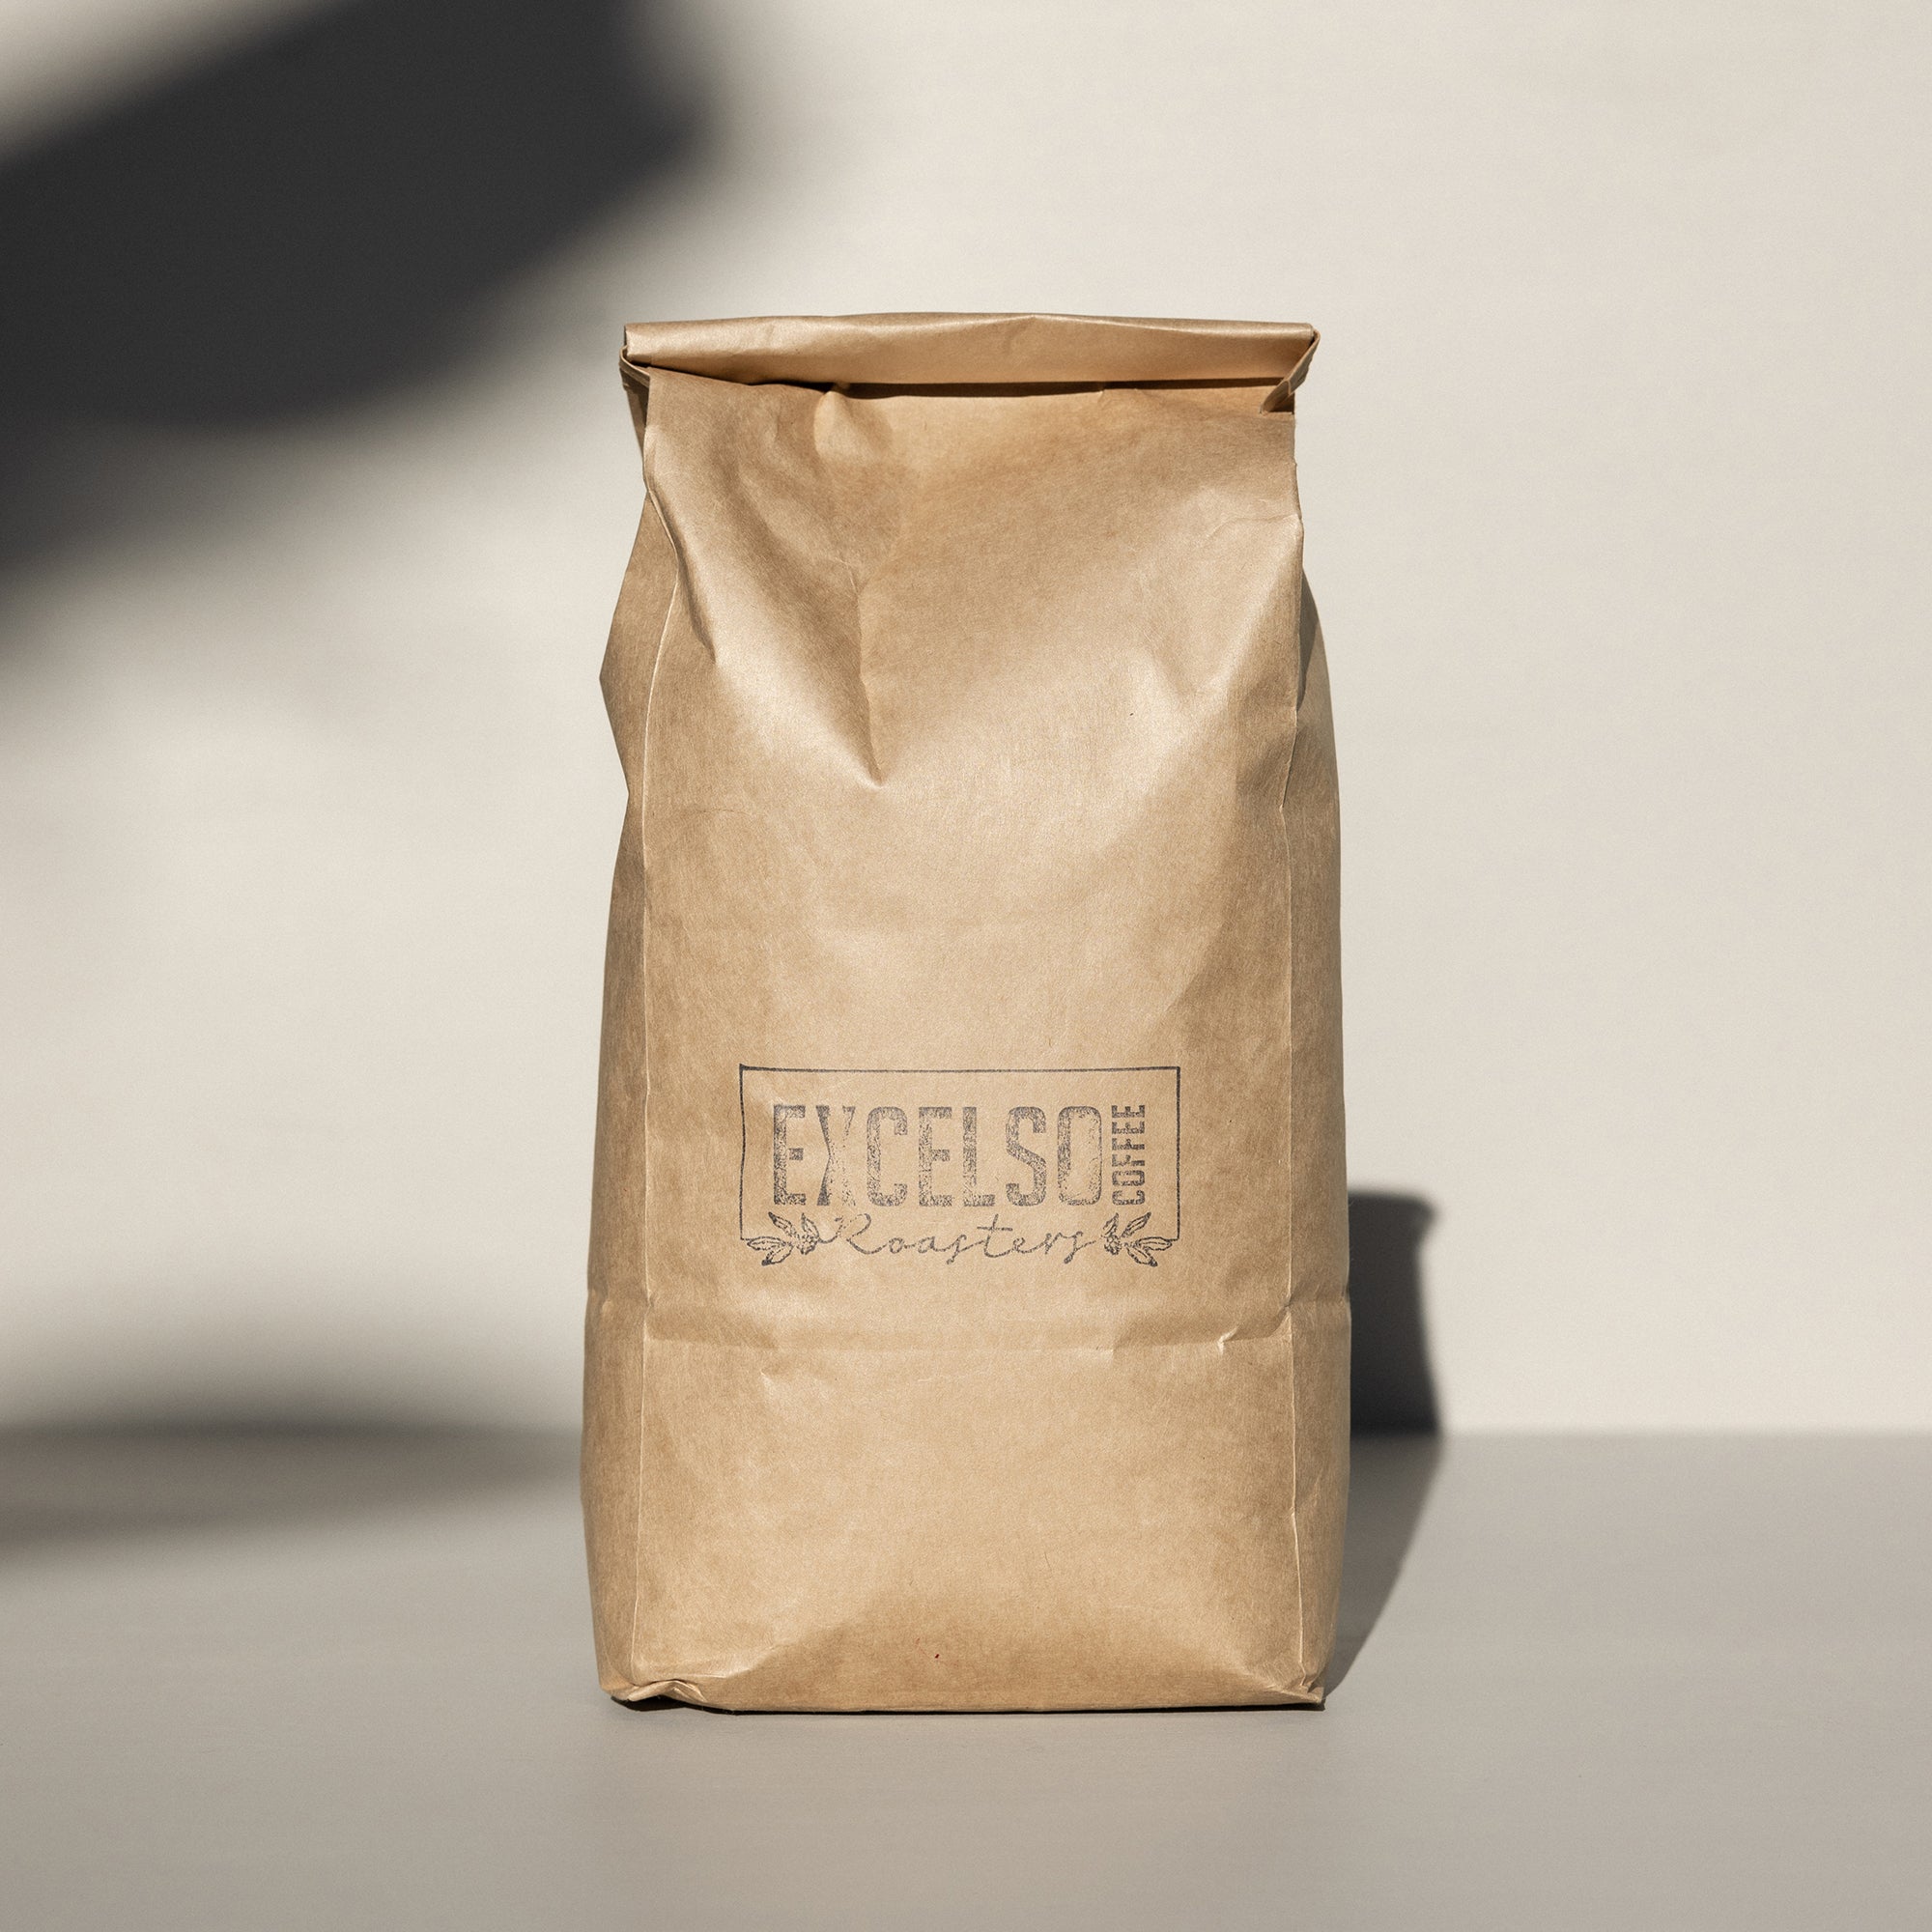 Excelso Coffee 1kg